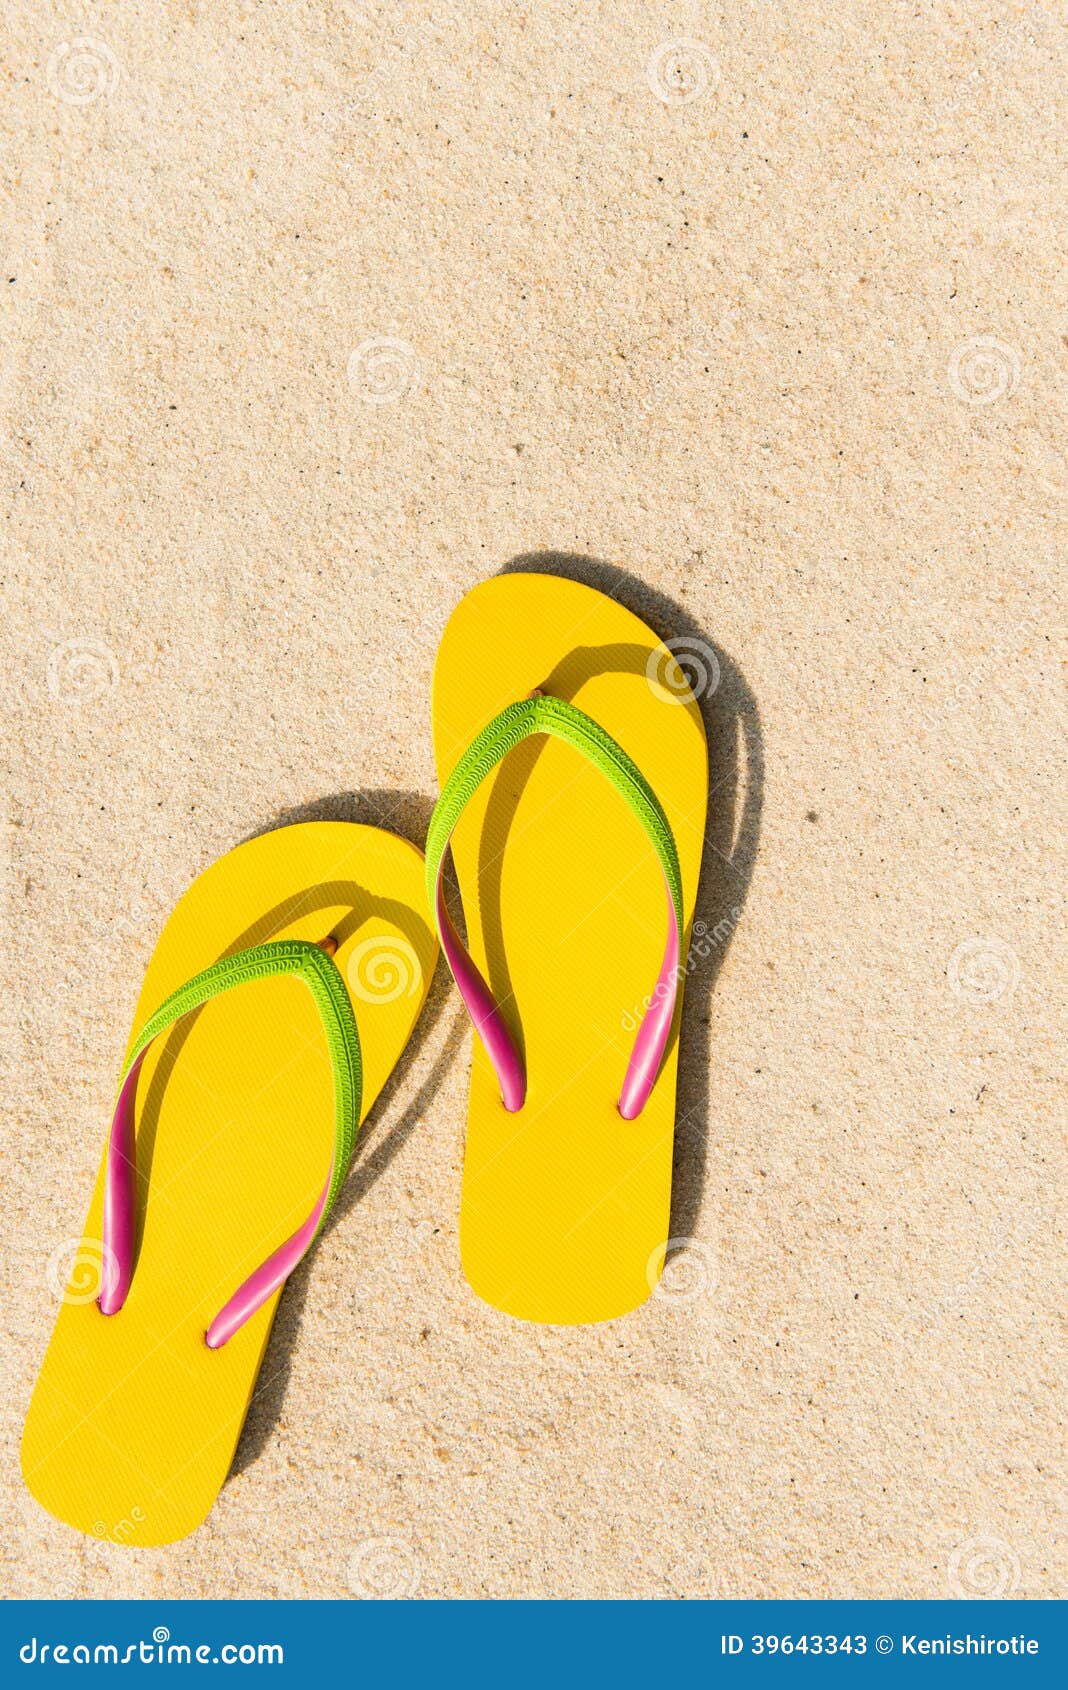 Flip flop on beach stock image. Image of background, sunlight - 39643343